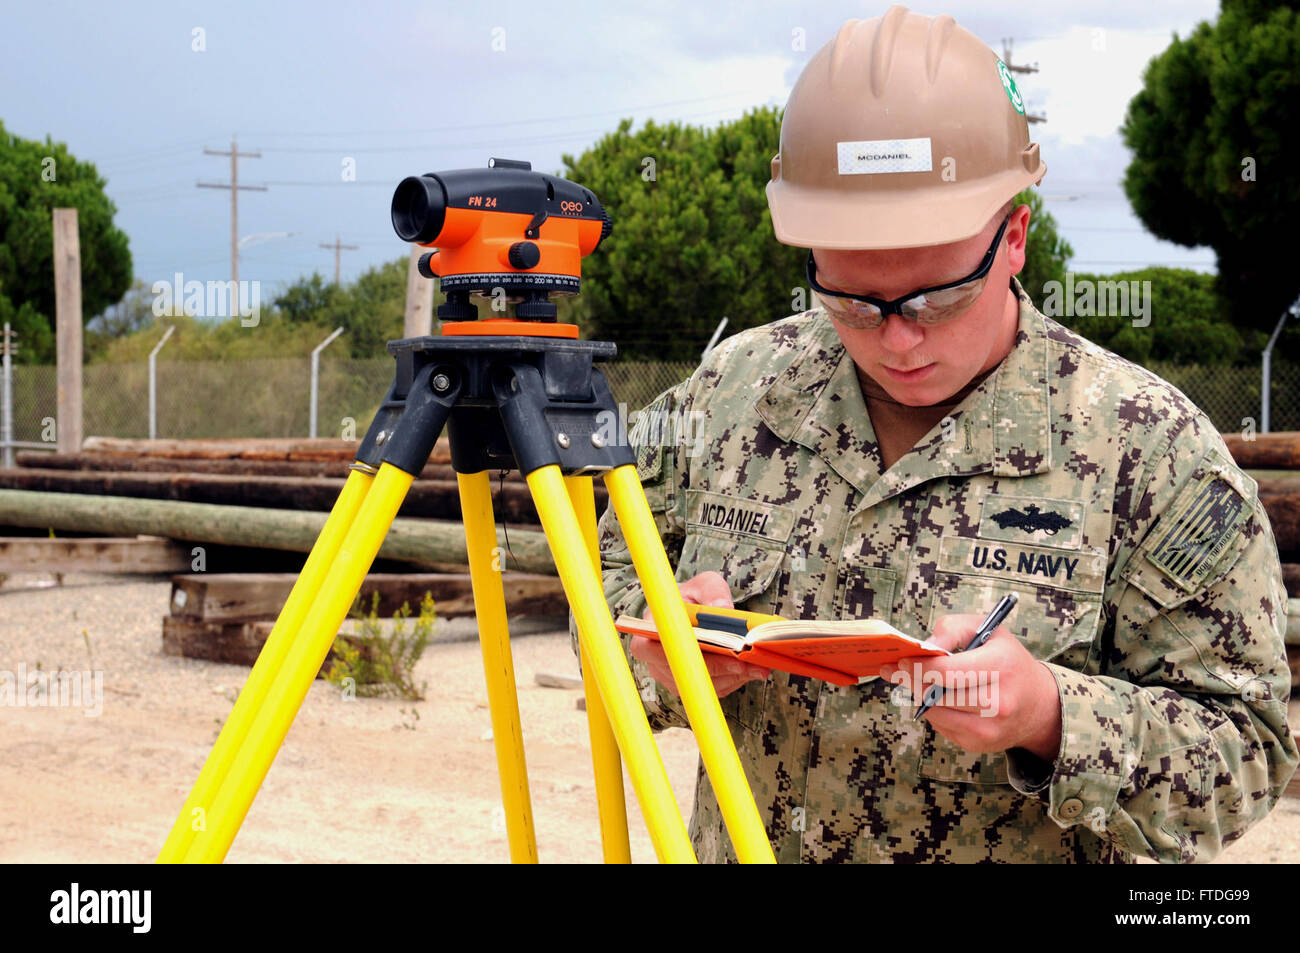 151011-N-SD965-039 ROTA, Spain (Oct. 11, 2015) Engineering Aide Constructionman Dylan McDaniel, from El Paso, Illinois, assigned to Naval Mobile Construction Battalion 1, calculates elevation for a trench being dug for utilities pipes on Naval Station Rota, Spain, Oct. 11, 2015. The trench is for a shipboard electronic systems evaluation facilities project which will provide test and evaluation services to U.S. Navy, U.S. Coast Guard and Military Sealift Command activities as well as allied foreign navies. (U.S. Navy photo by Mass Communication Specialist 1st Class Brannon Deugan/Released) Stock Photo